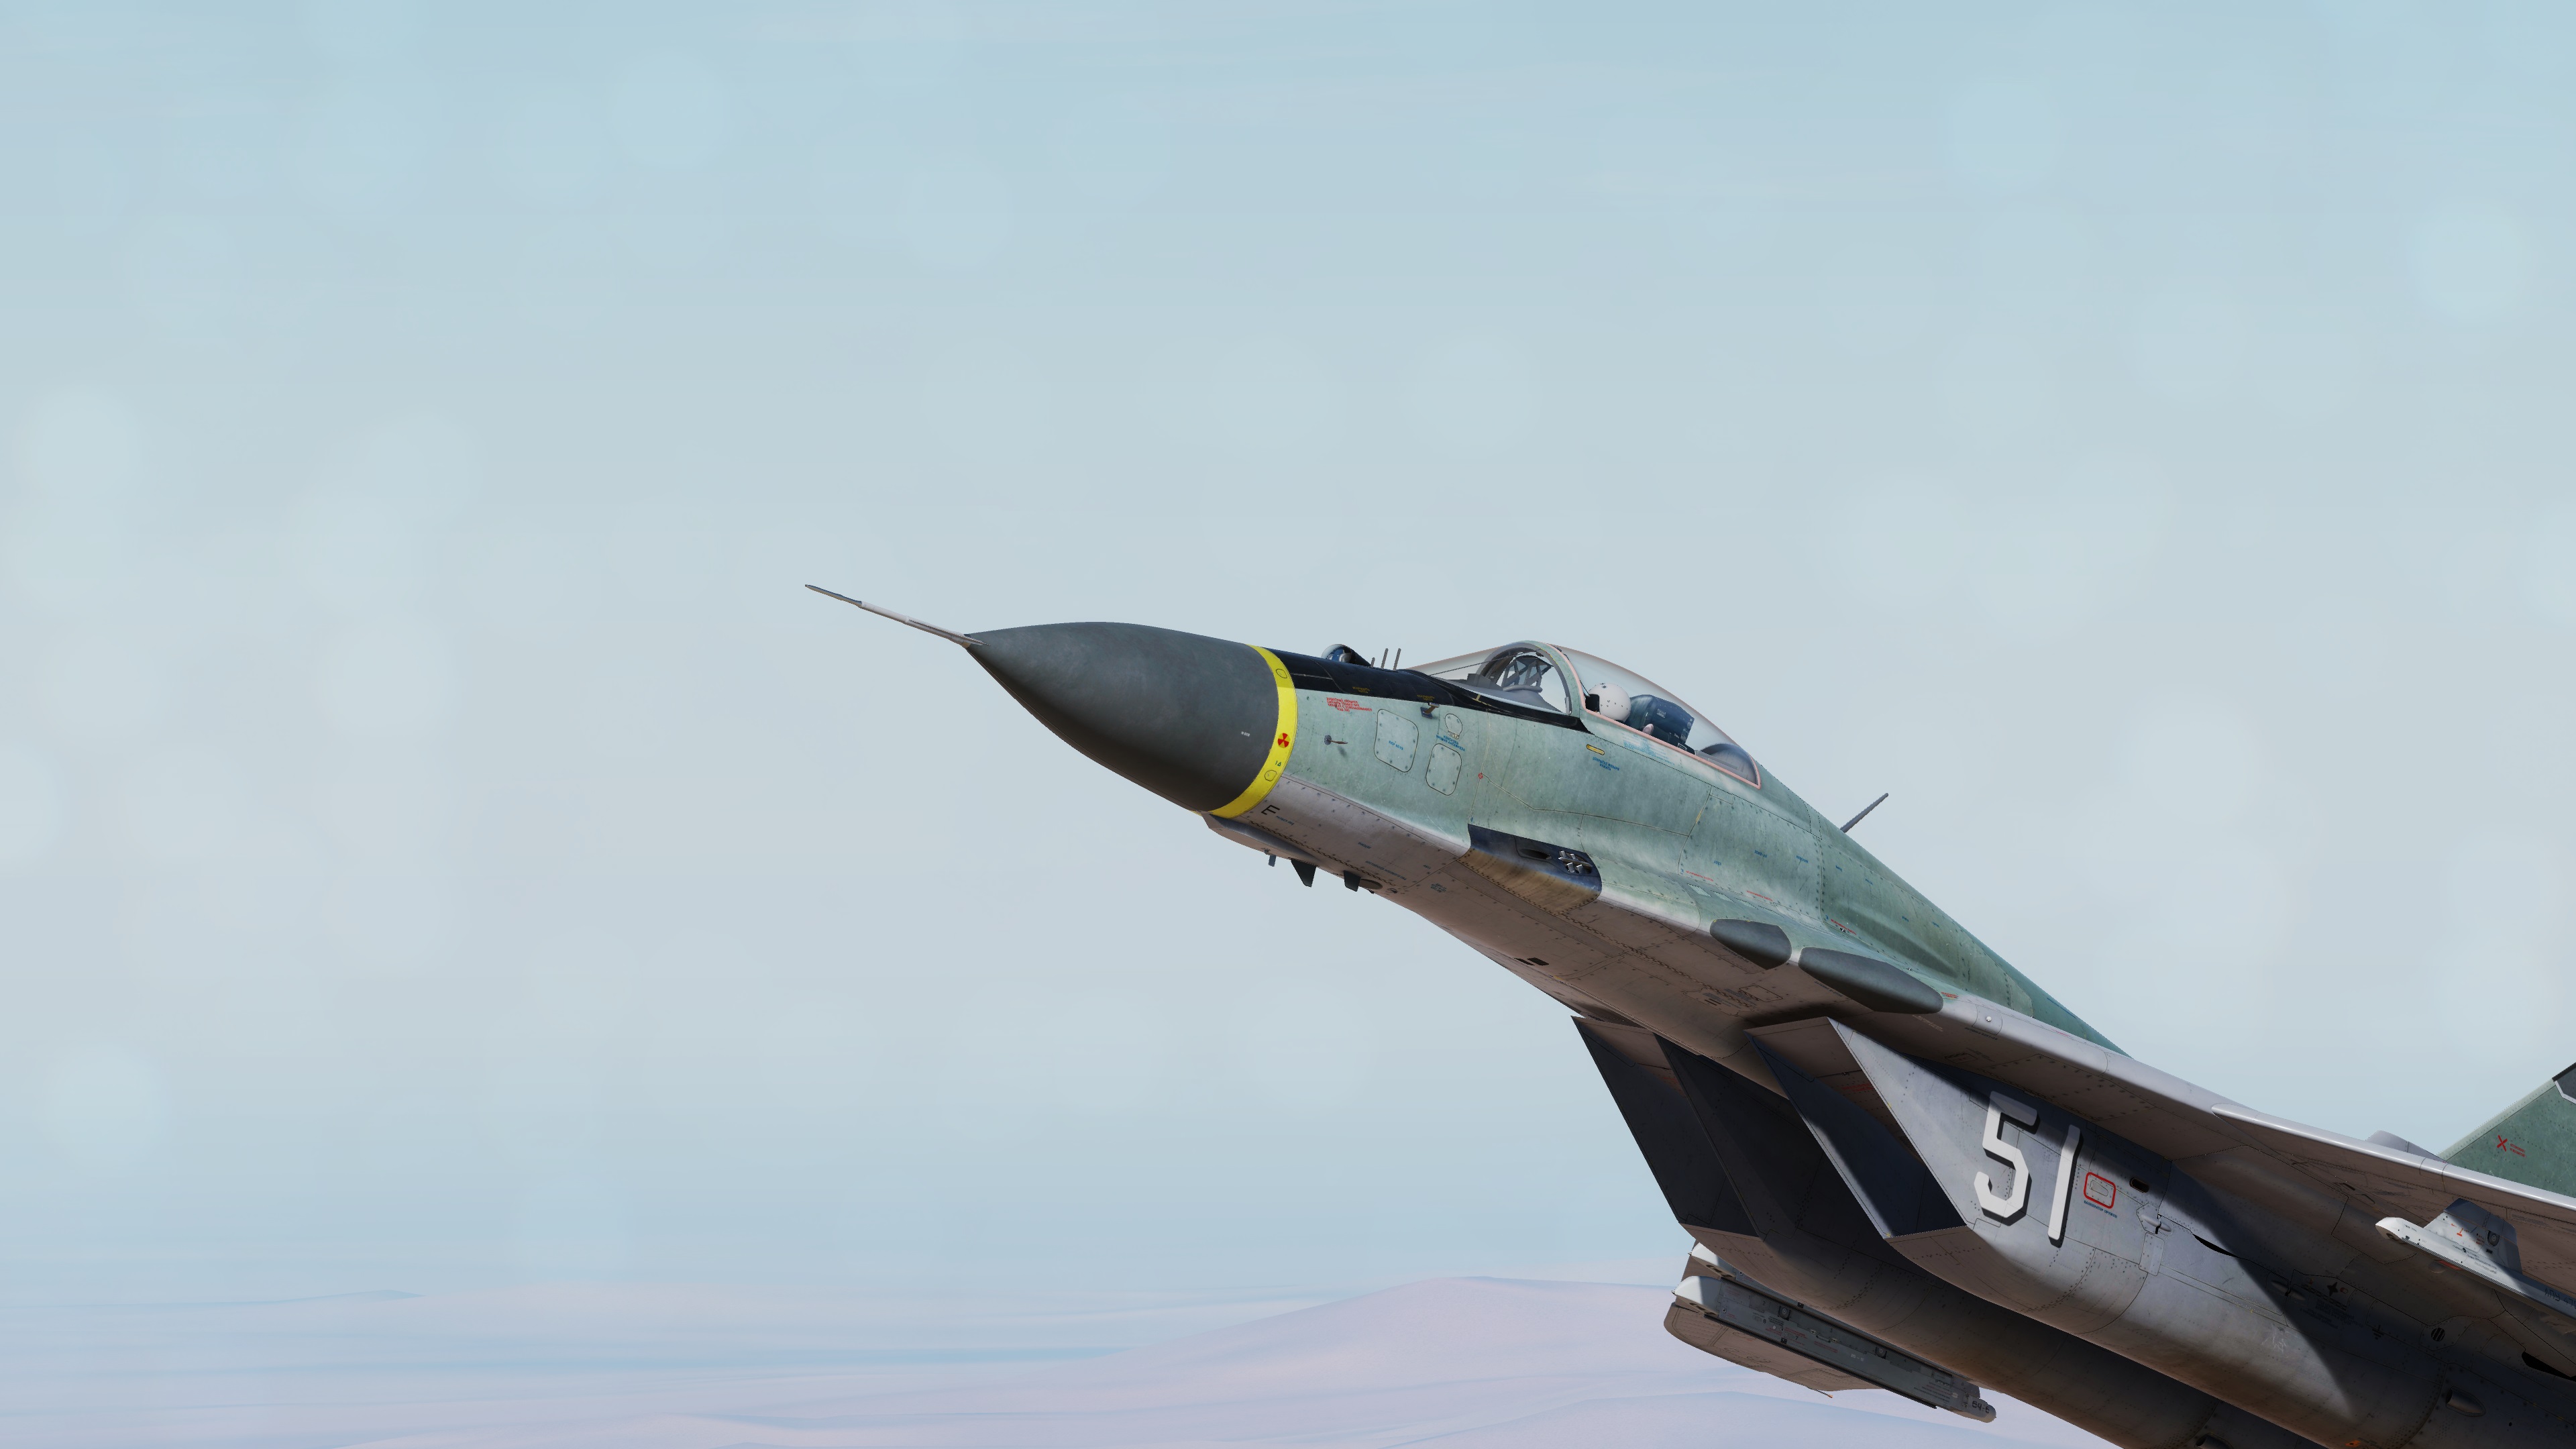 MiG-29A Yellow Ring МиГ-29 Желтое кольцо [fictional based on Serbia and DDR]